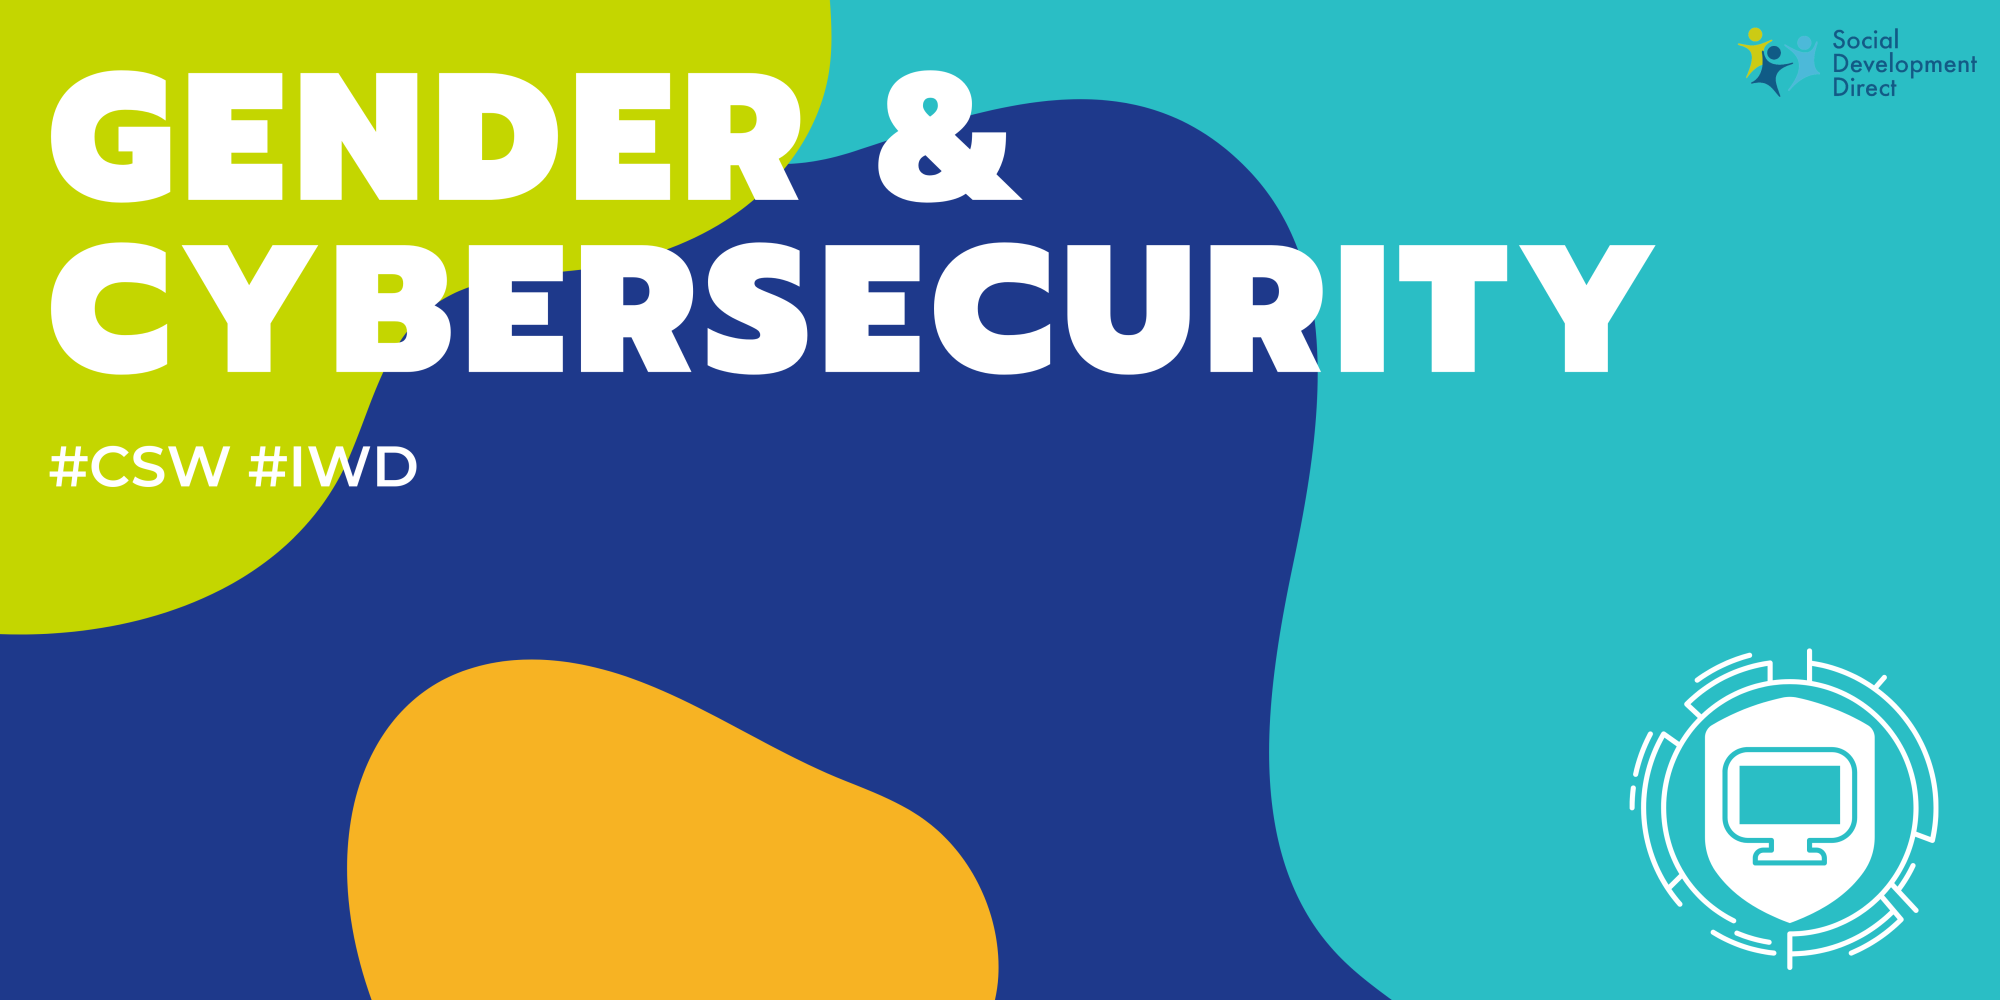 Gender and cybersecurity banner.